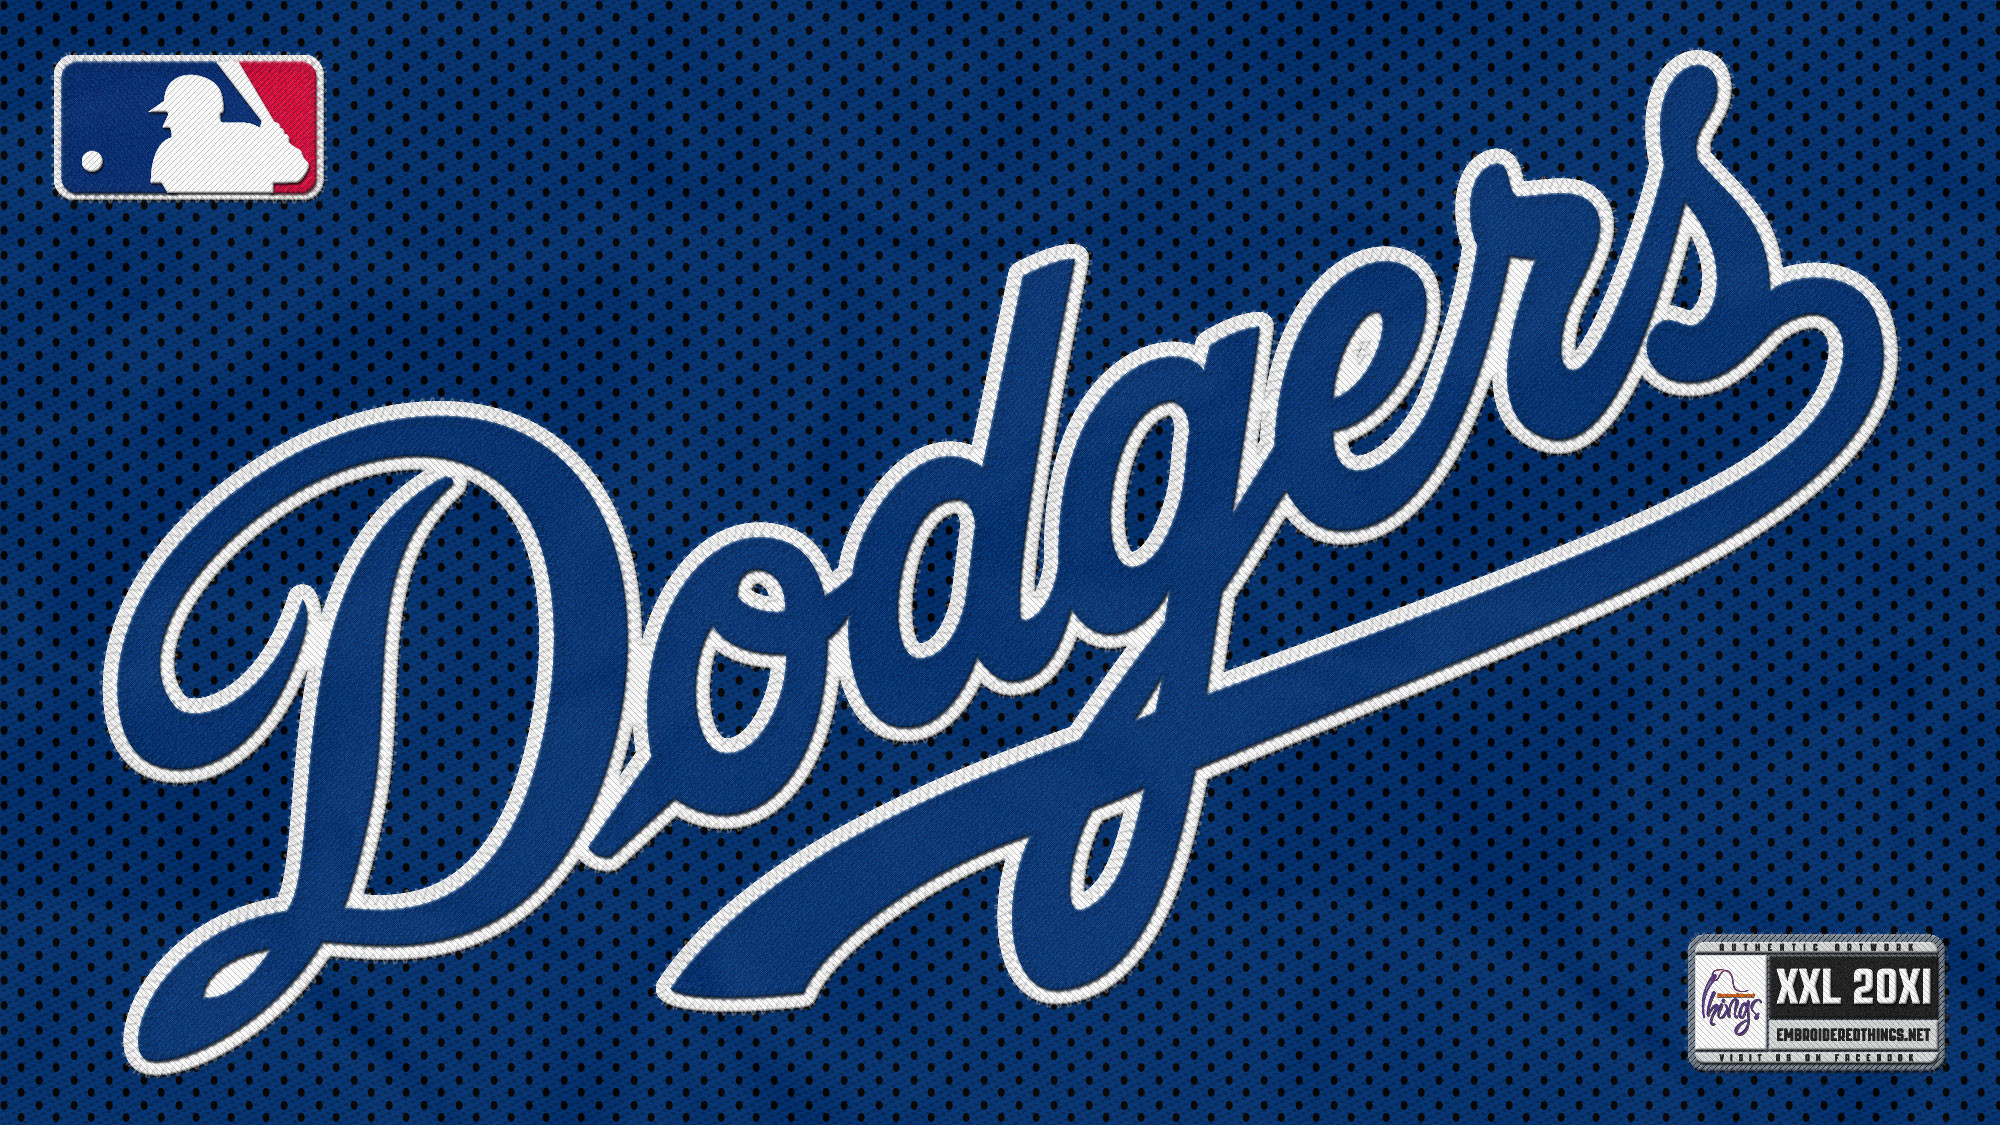 2000x1125 ... los angeles dodgers wallpapers wallpapers; dodgers wallpaper 2016  wallpapersafari ...